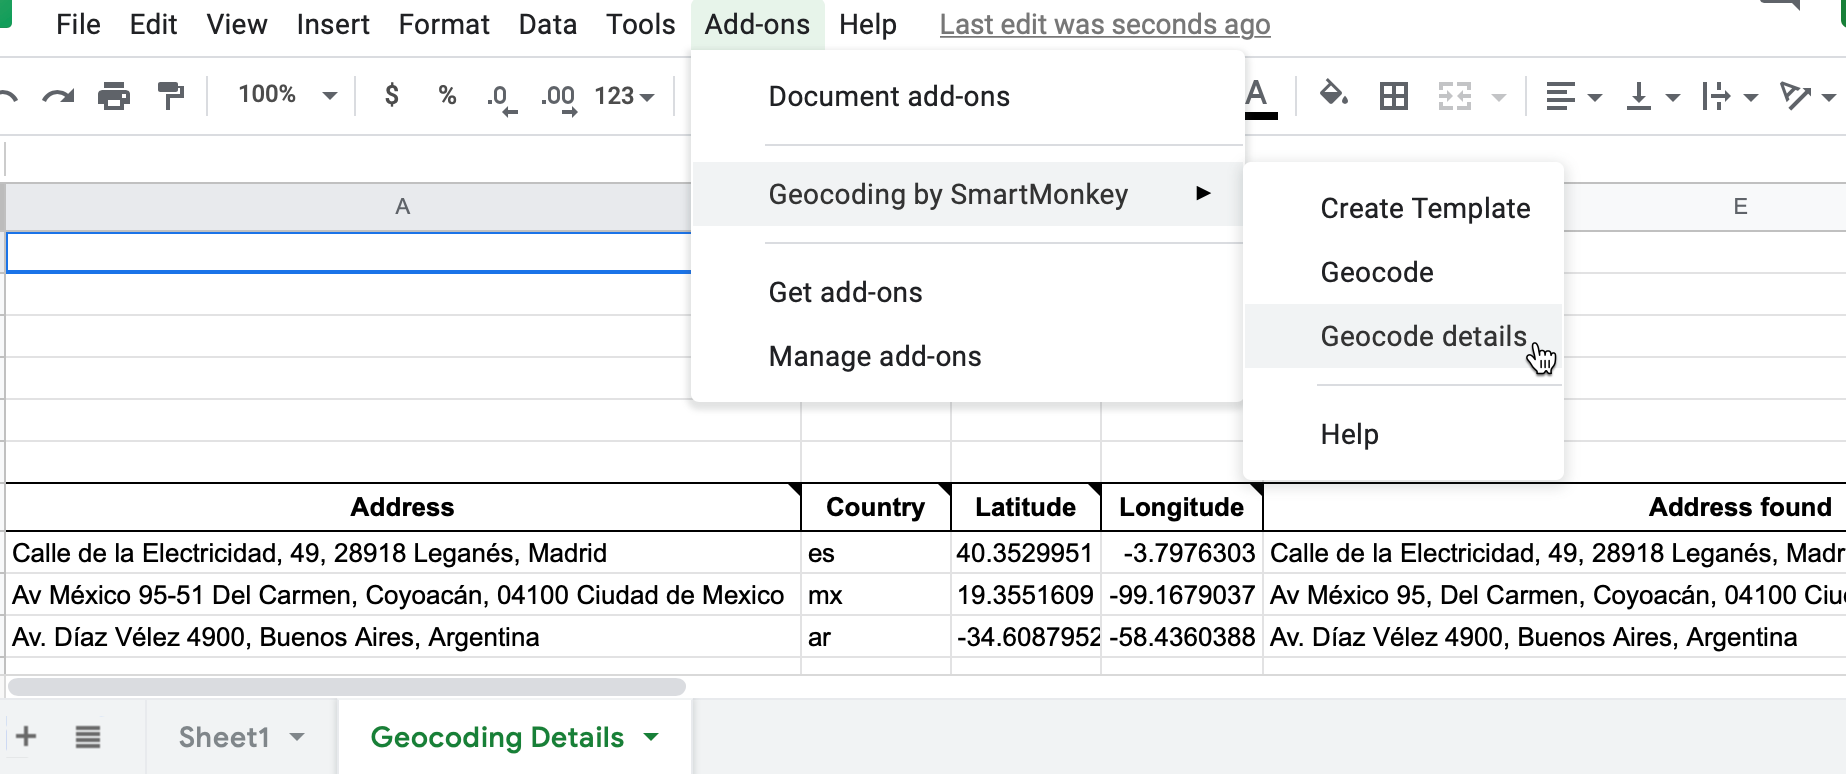 Select Add-ons–Geocoding by SmartMonkey–Geocode Details to display sample data with results for three new columns: Latitude, Longitude, and Address found.